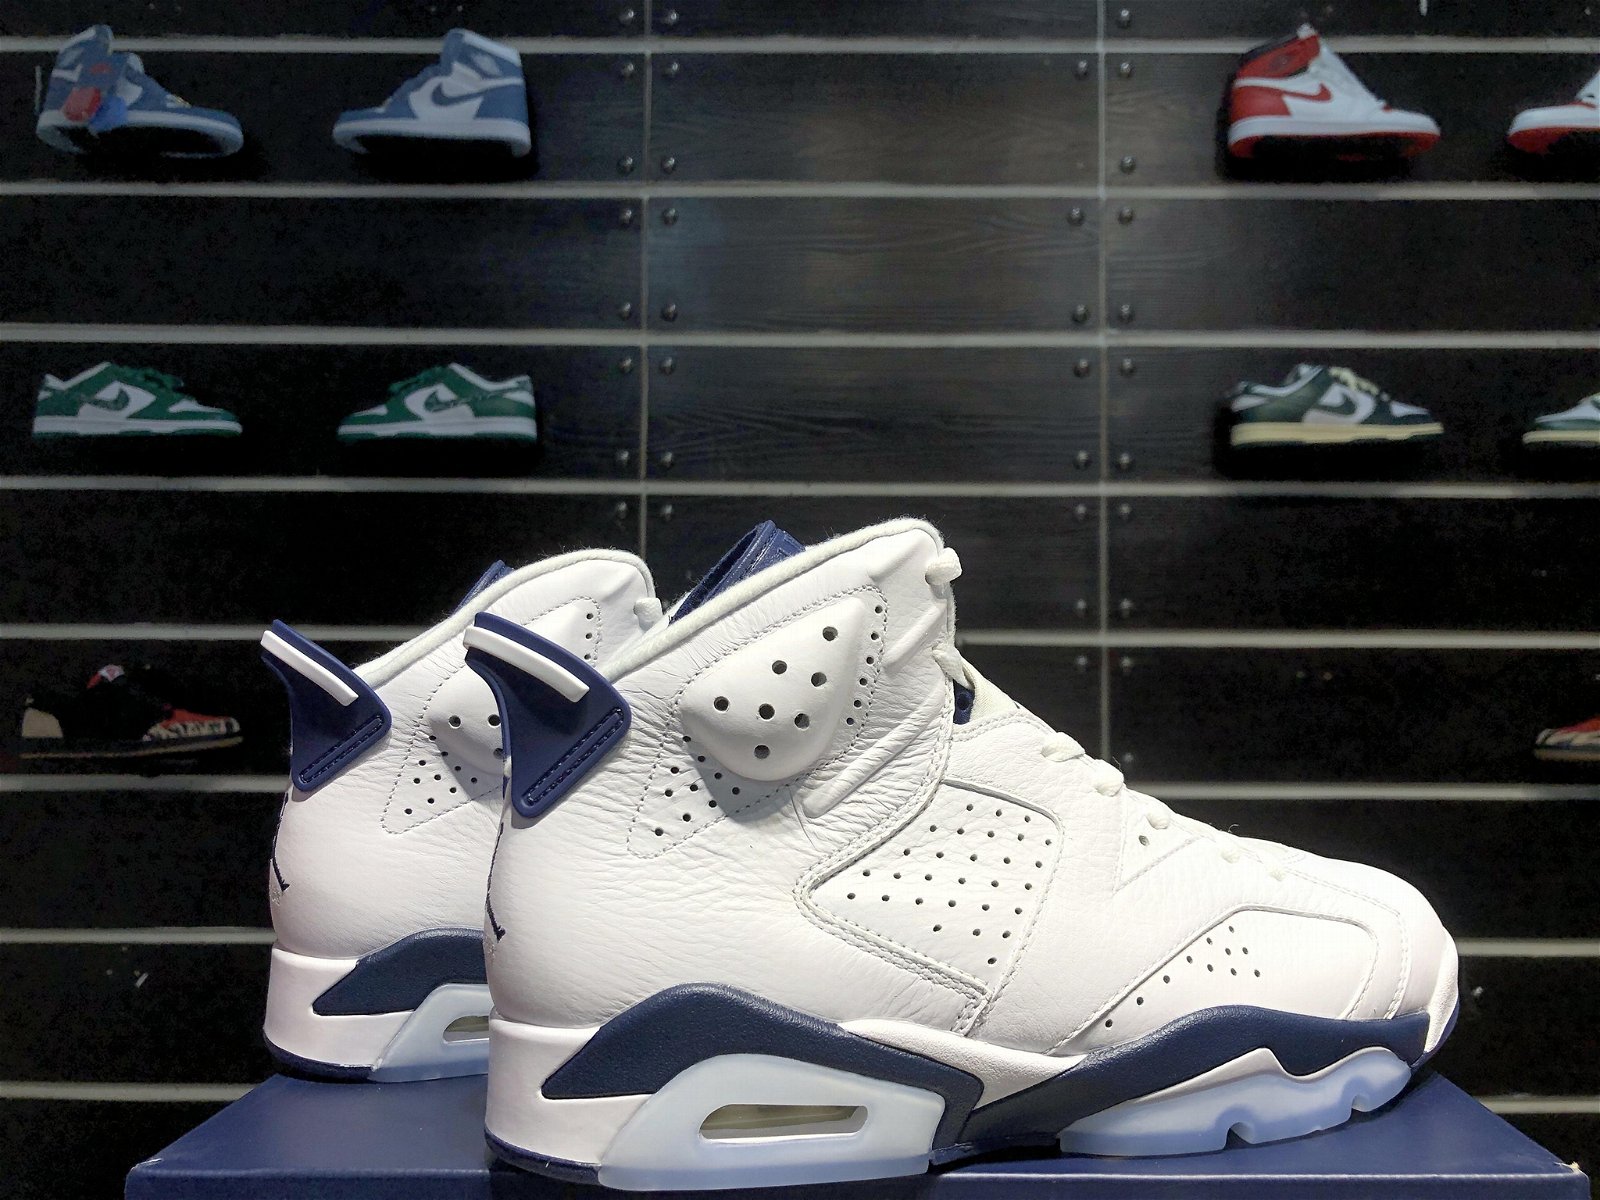 Air Jordan 6 “Midnight Navy”White and blue Cobon basketball shoes